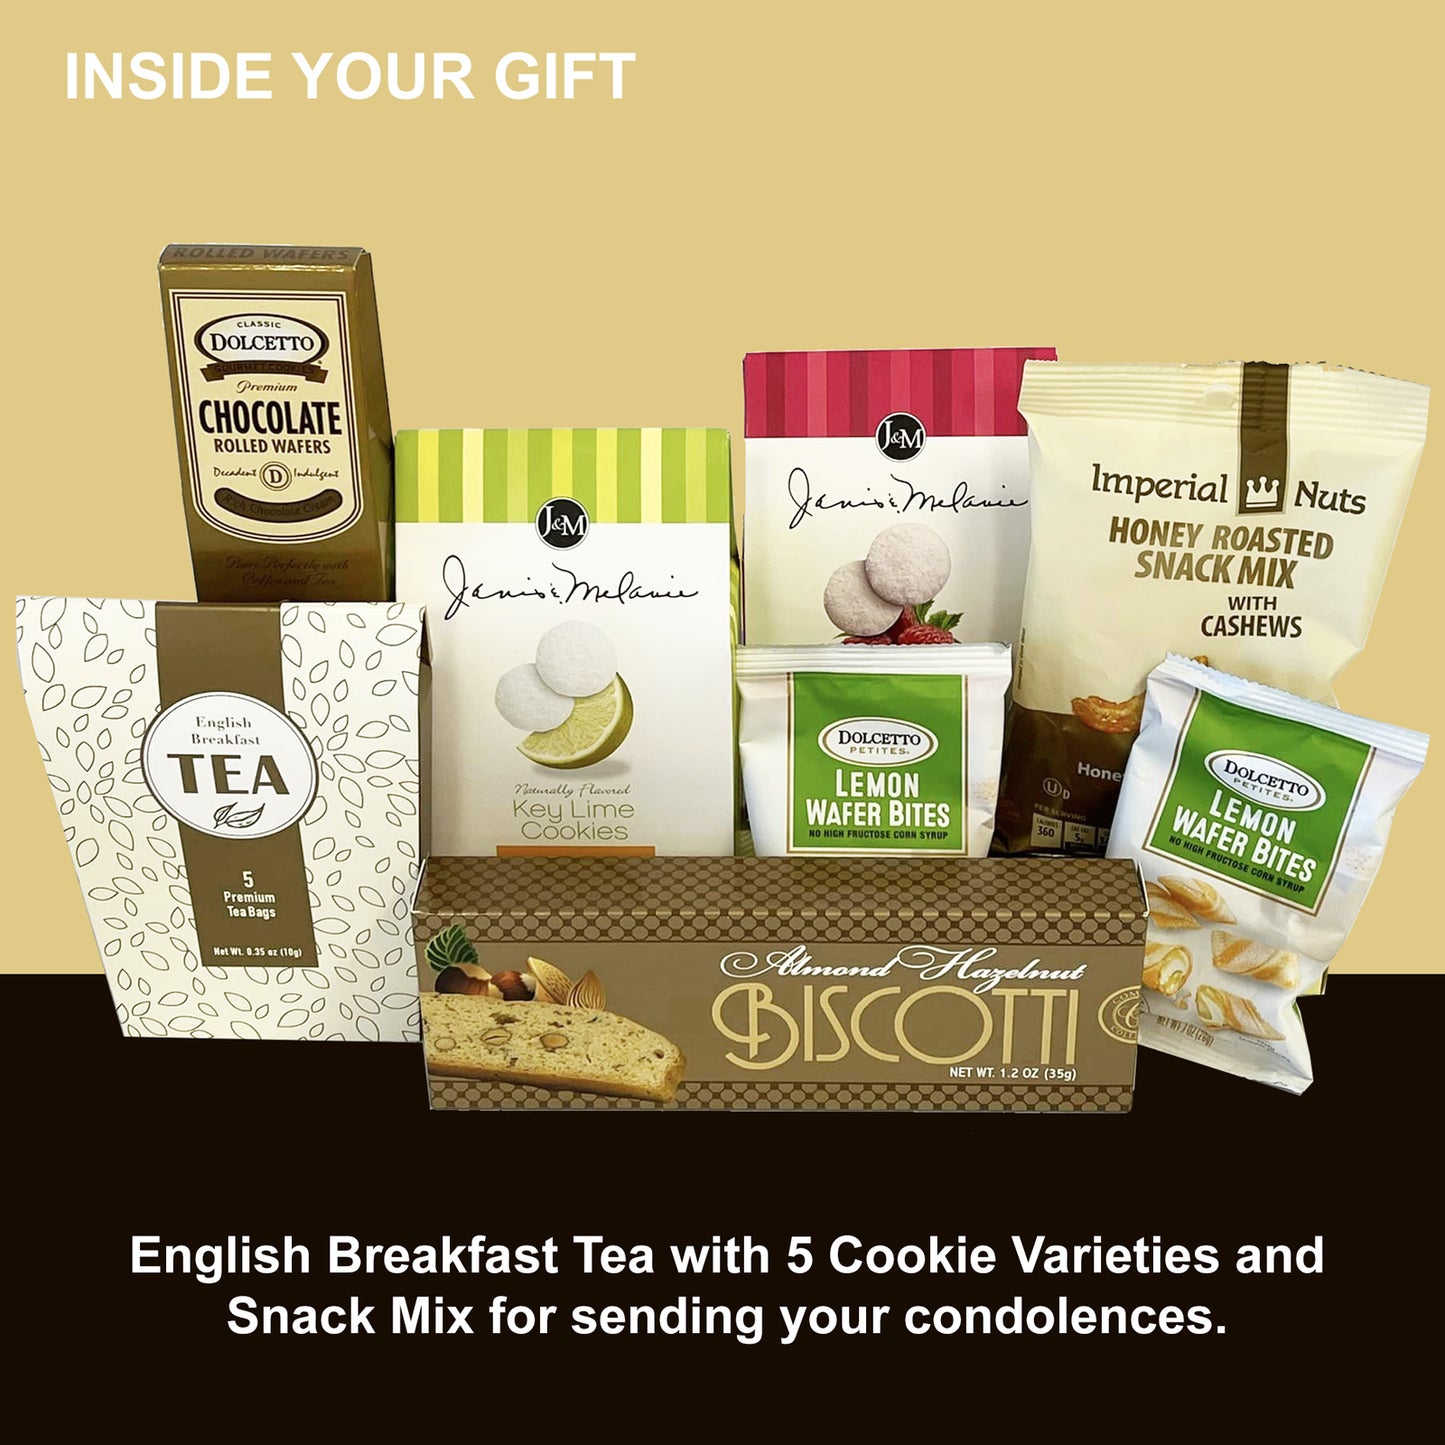 Sympathy Gift for Women with Tea and Cookies a Lovely Gift Box to Send Condolences on the Loss of a Loved One  